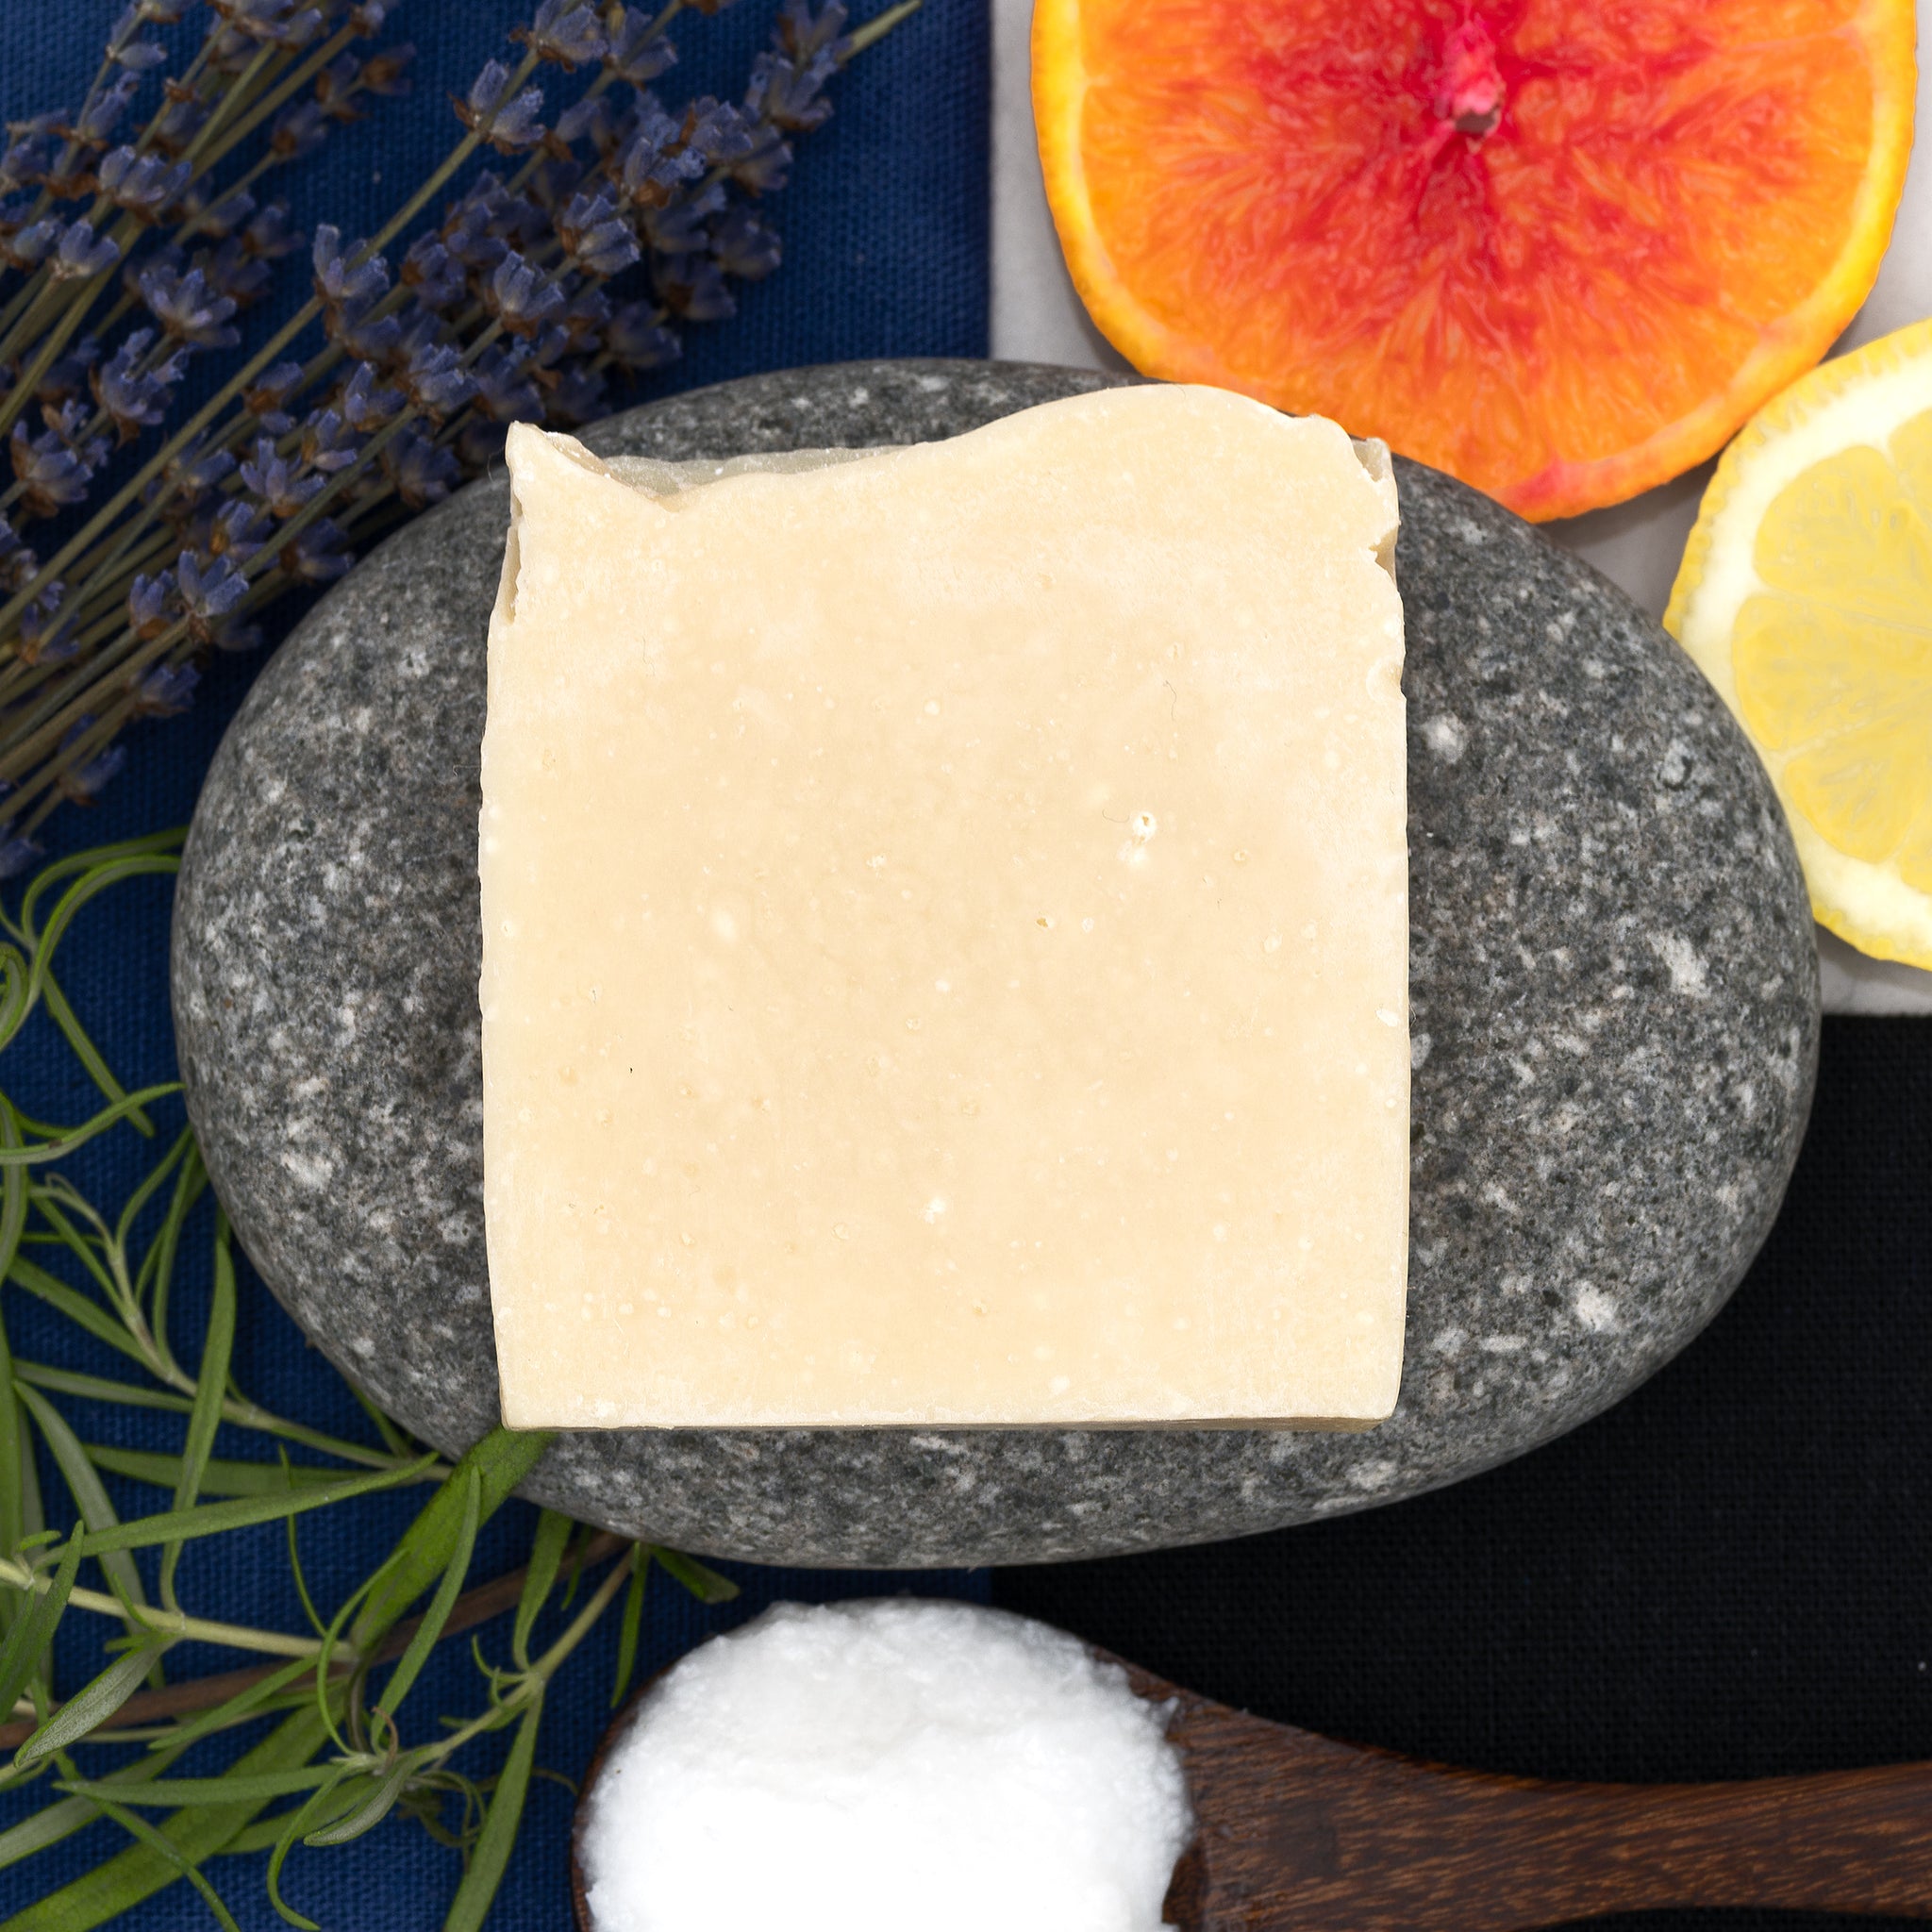 Lavender and Rosemary 100g - Shampoo Bar - Clearstone